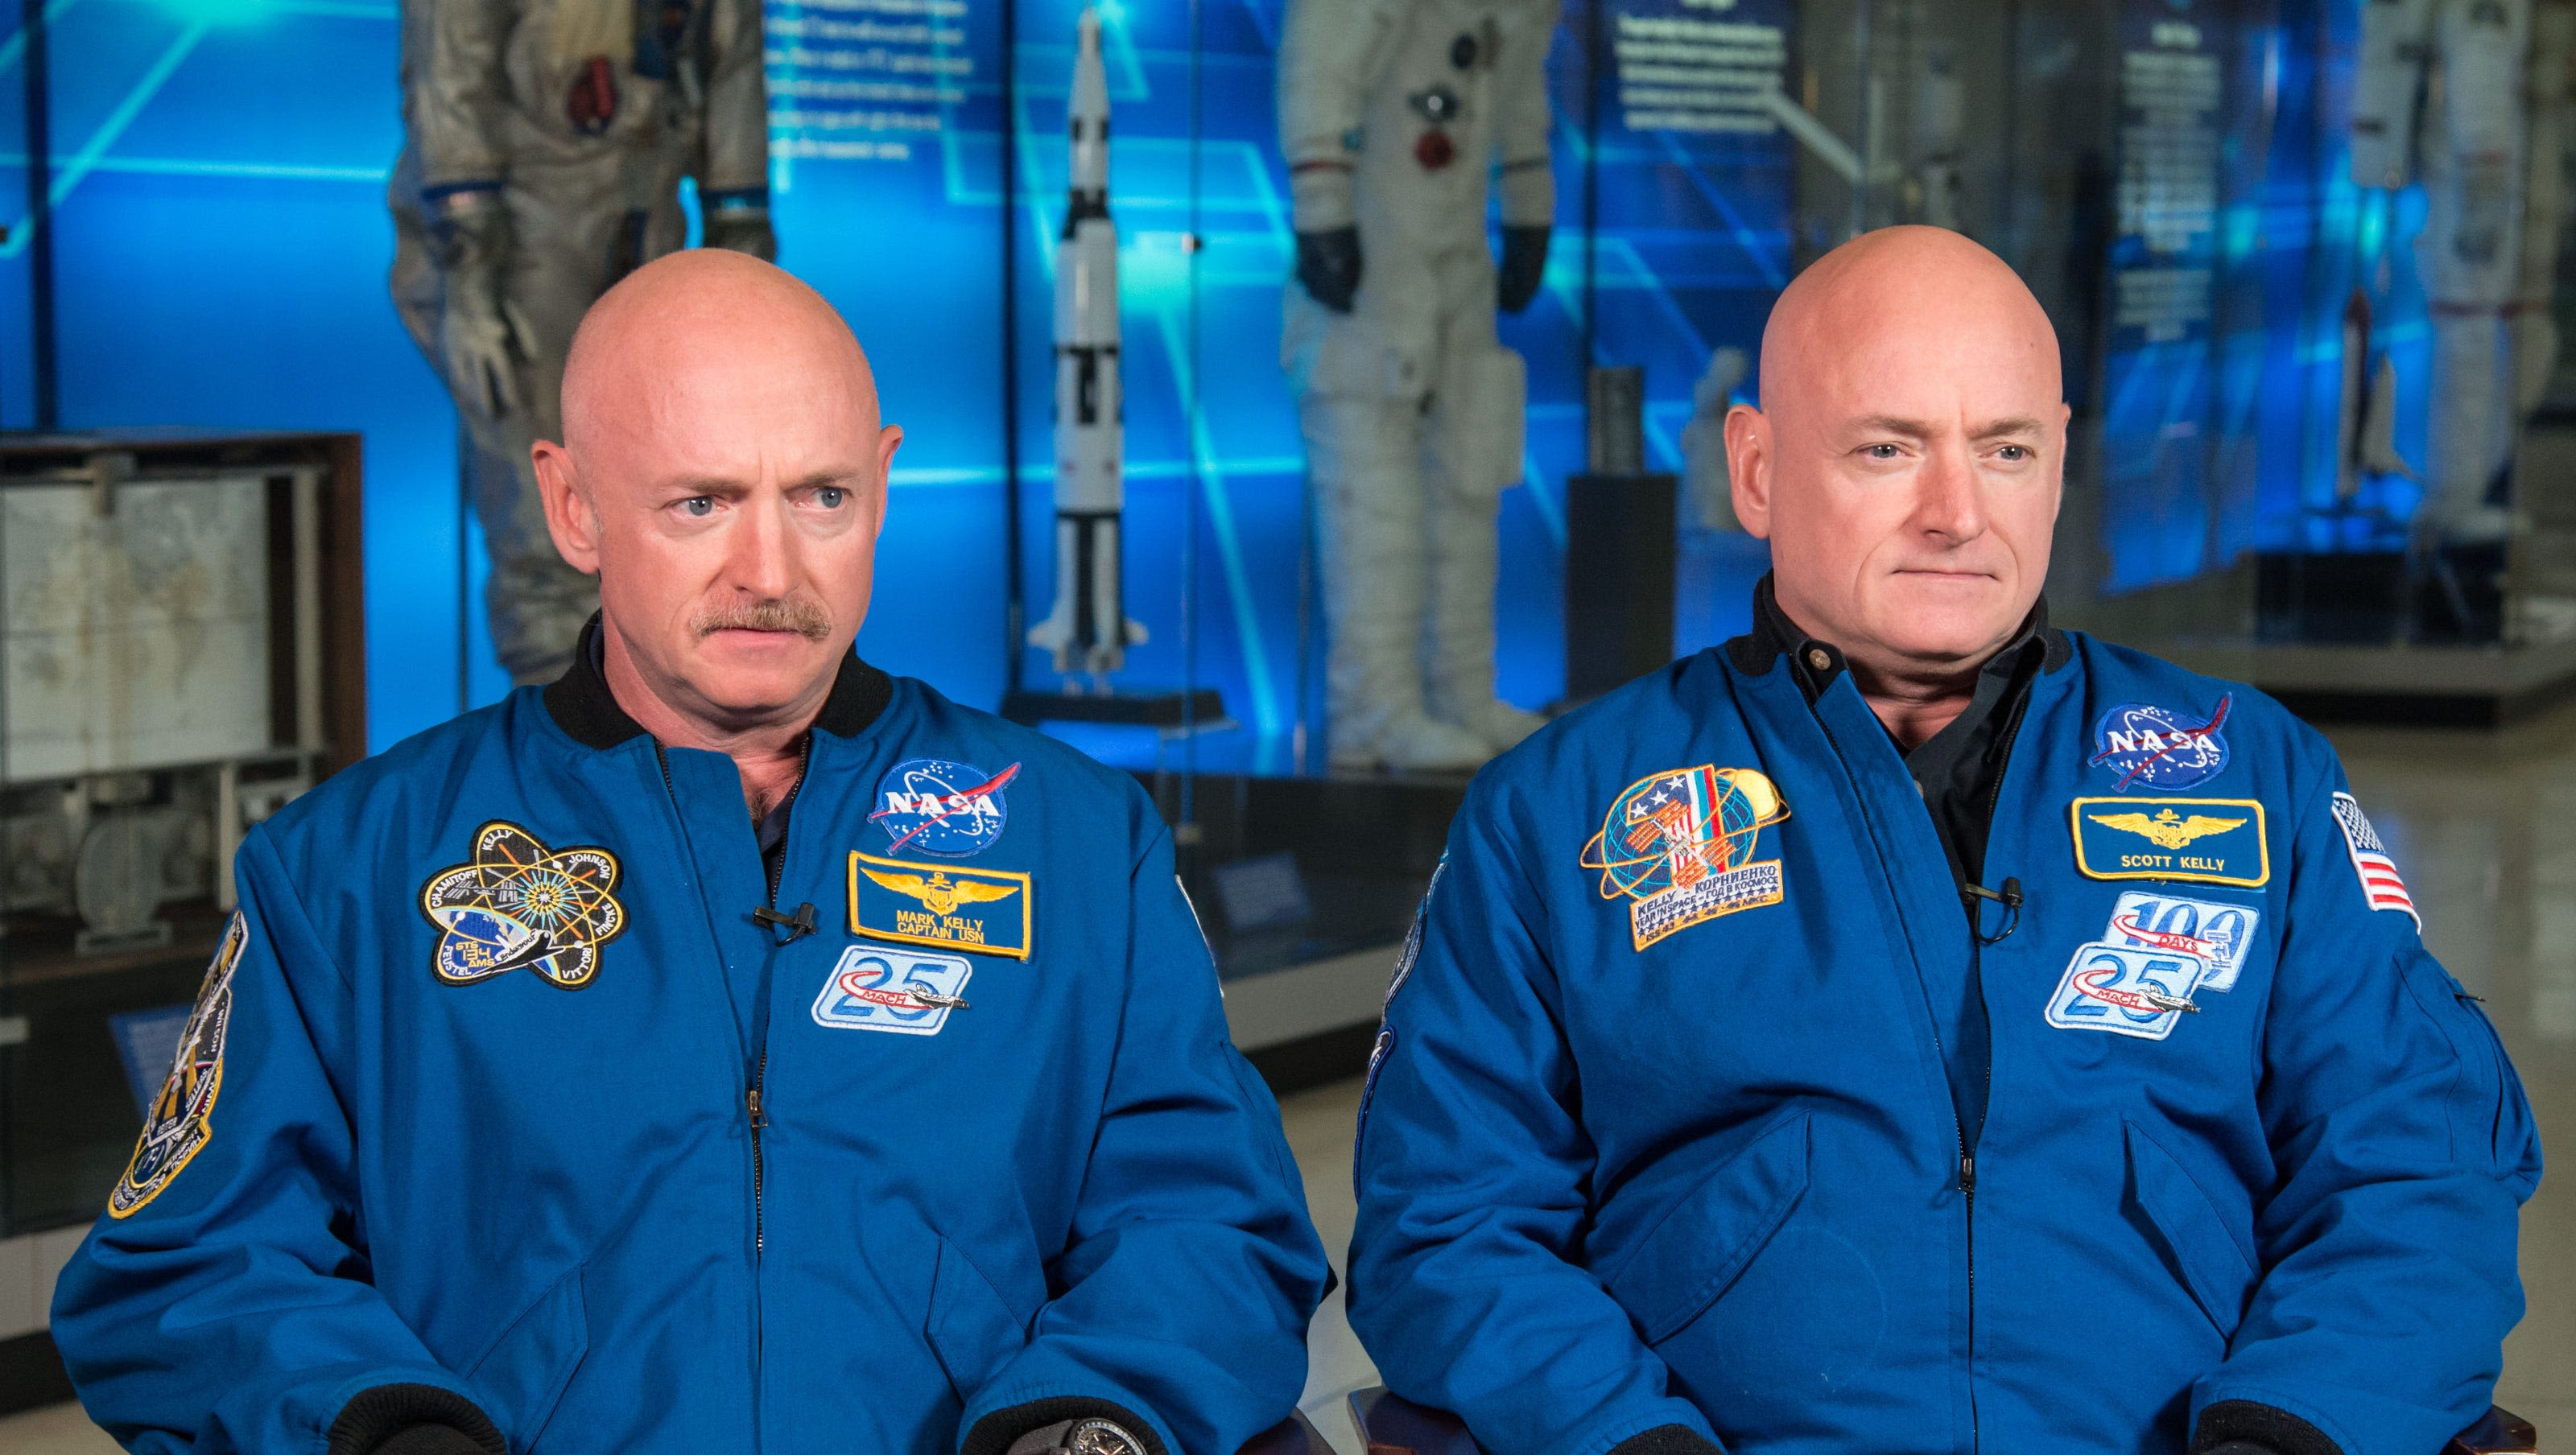 Here's how Mark Kelly's upbringing and military and NASA careers prepared him for politics